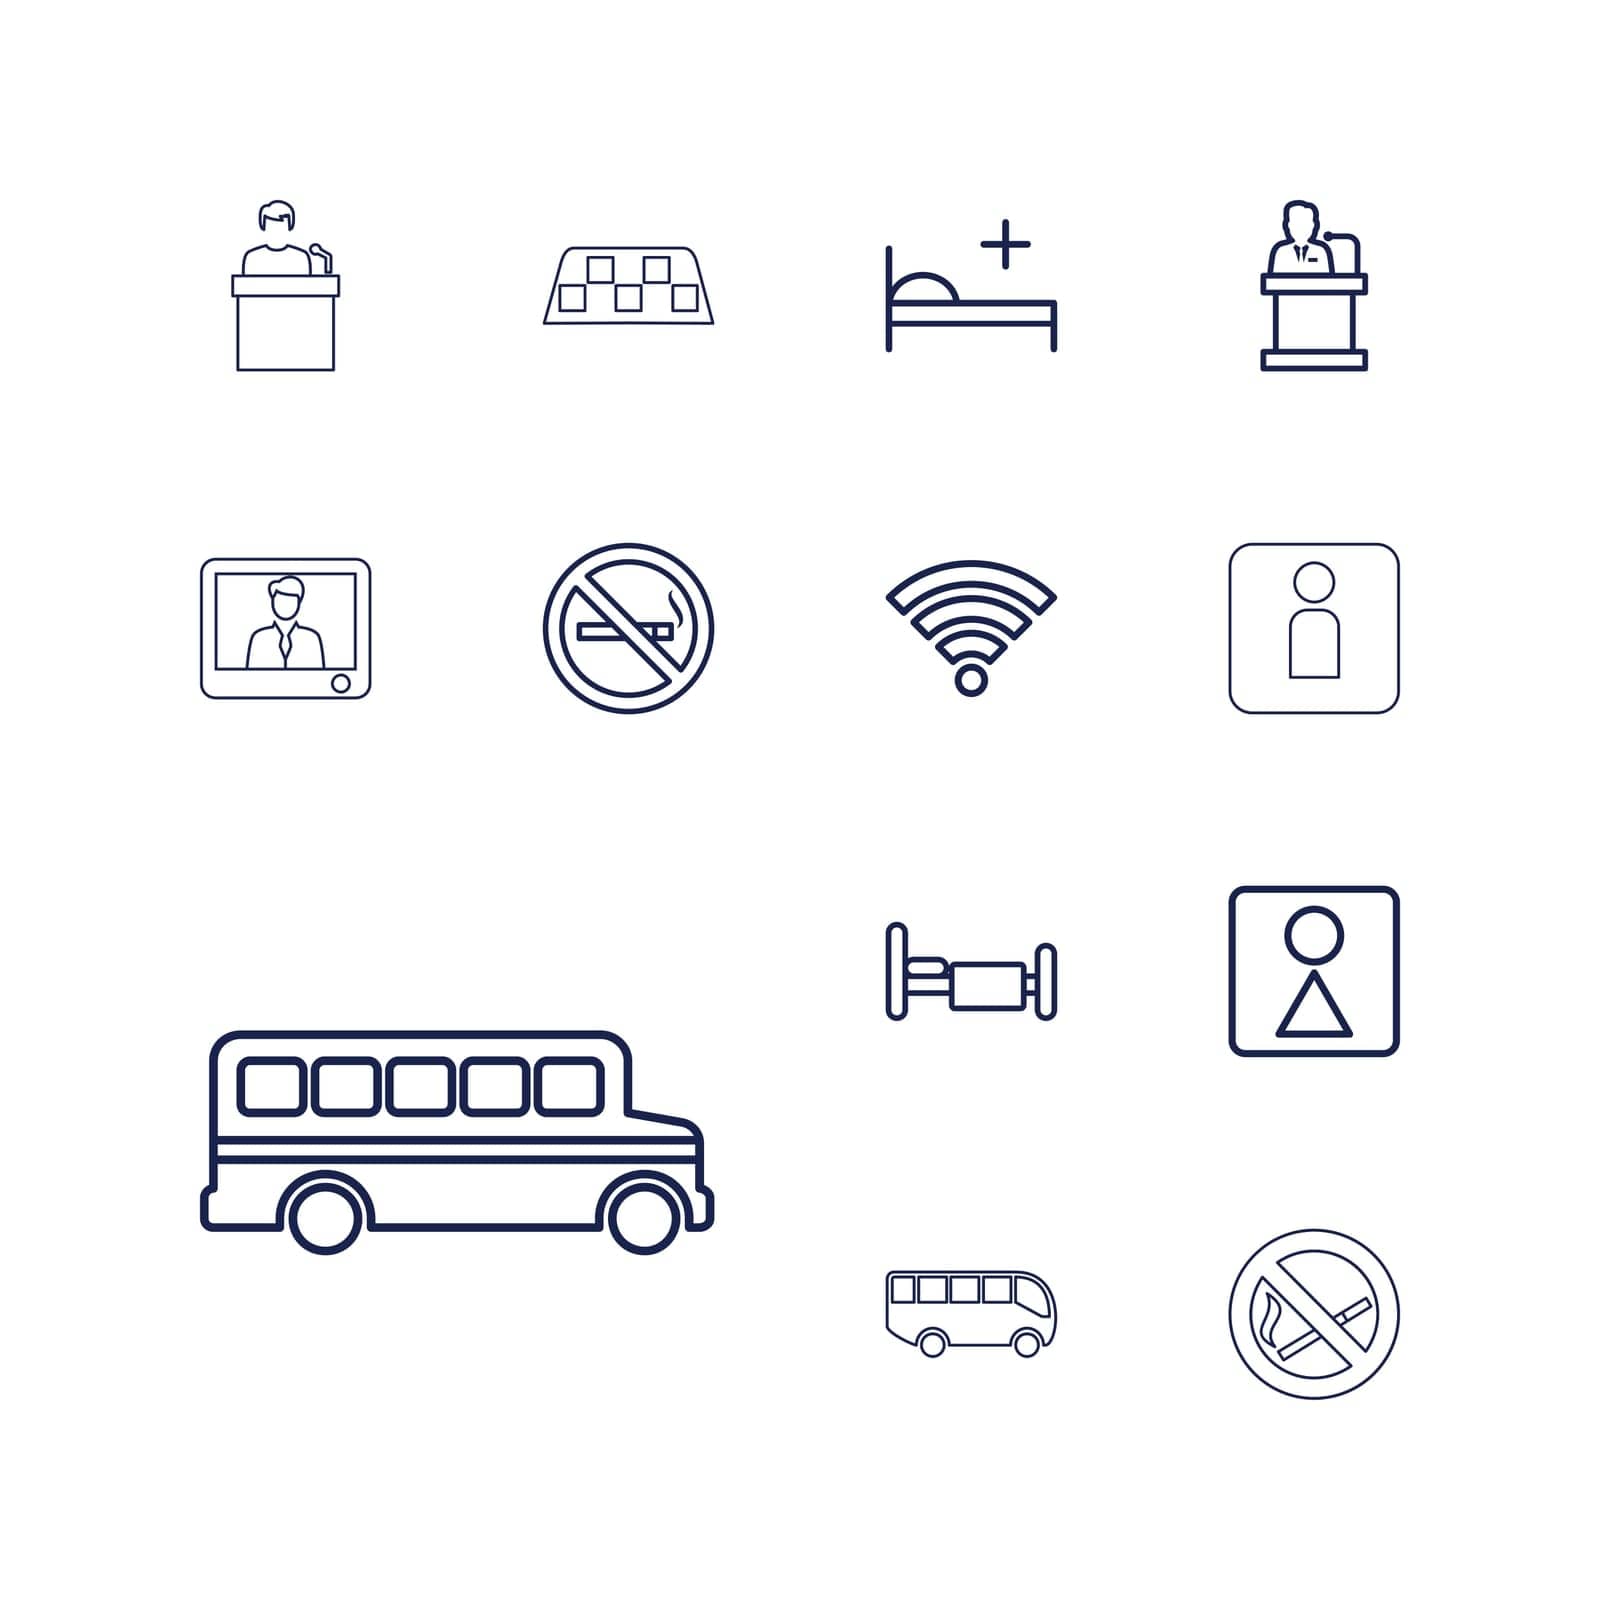 bed,symbol,no,bus,medical,tv,woman,conference,fi,airoirt,concept,icon,sign,isolated,wc,wi,white,public,design,smoking,vector,man,female,graphic,set,c,business,black,taxi,people,stop,background,person,speaker,silhouette,information,guest,illustration,travel by ogqcorp